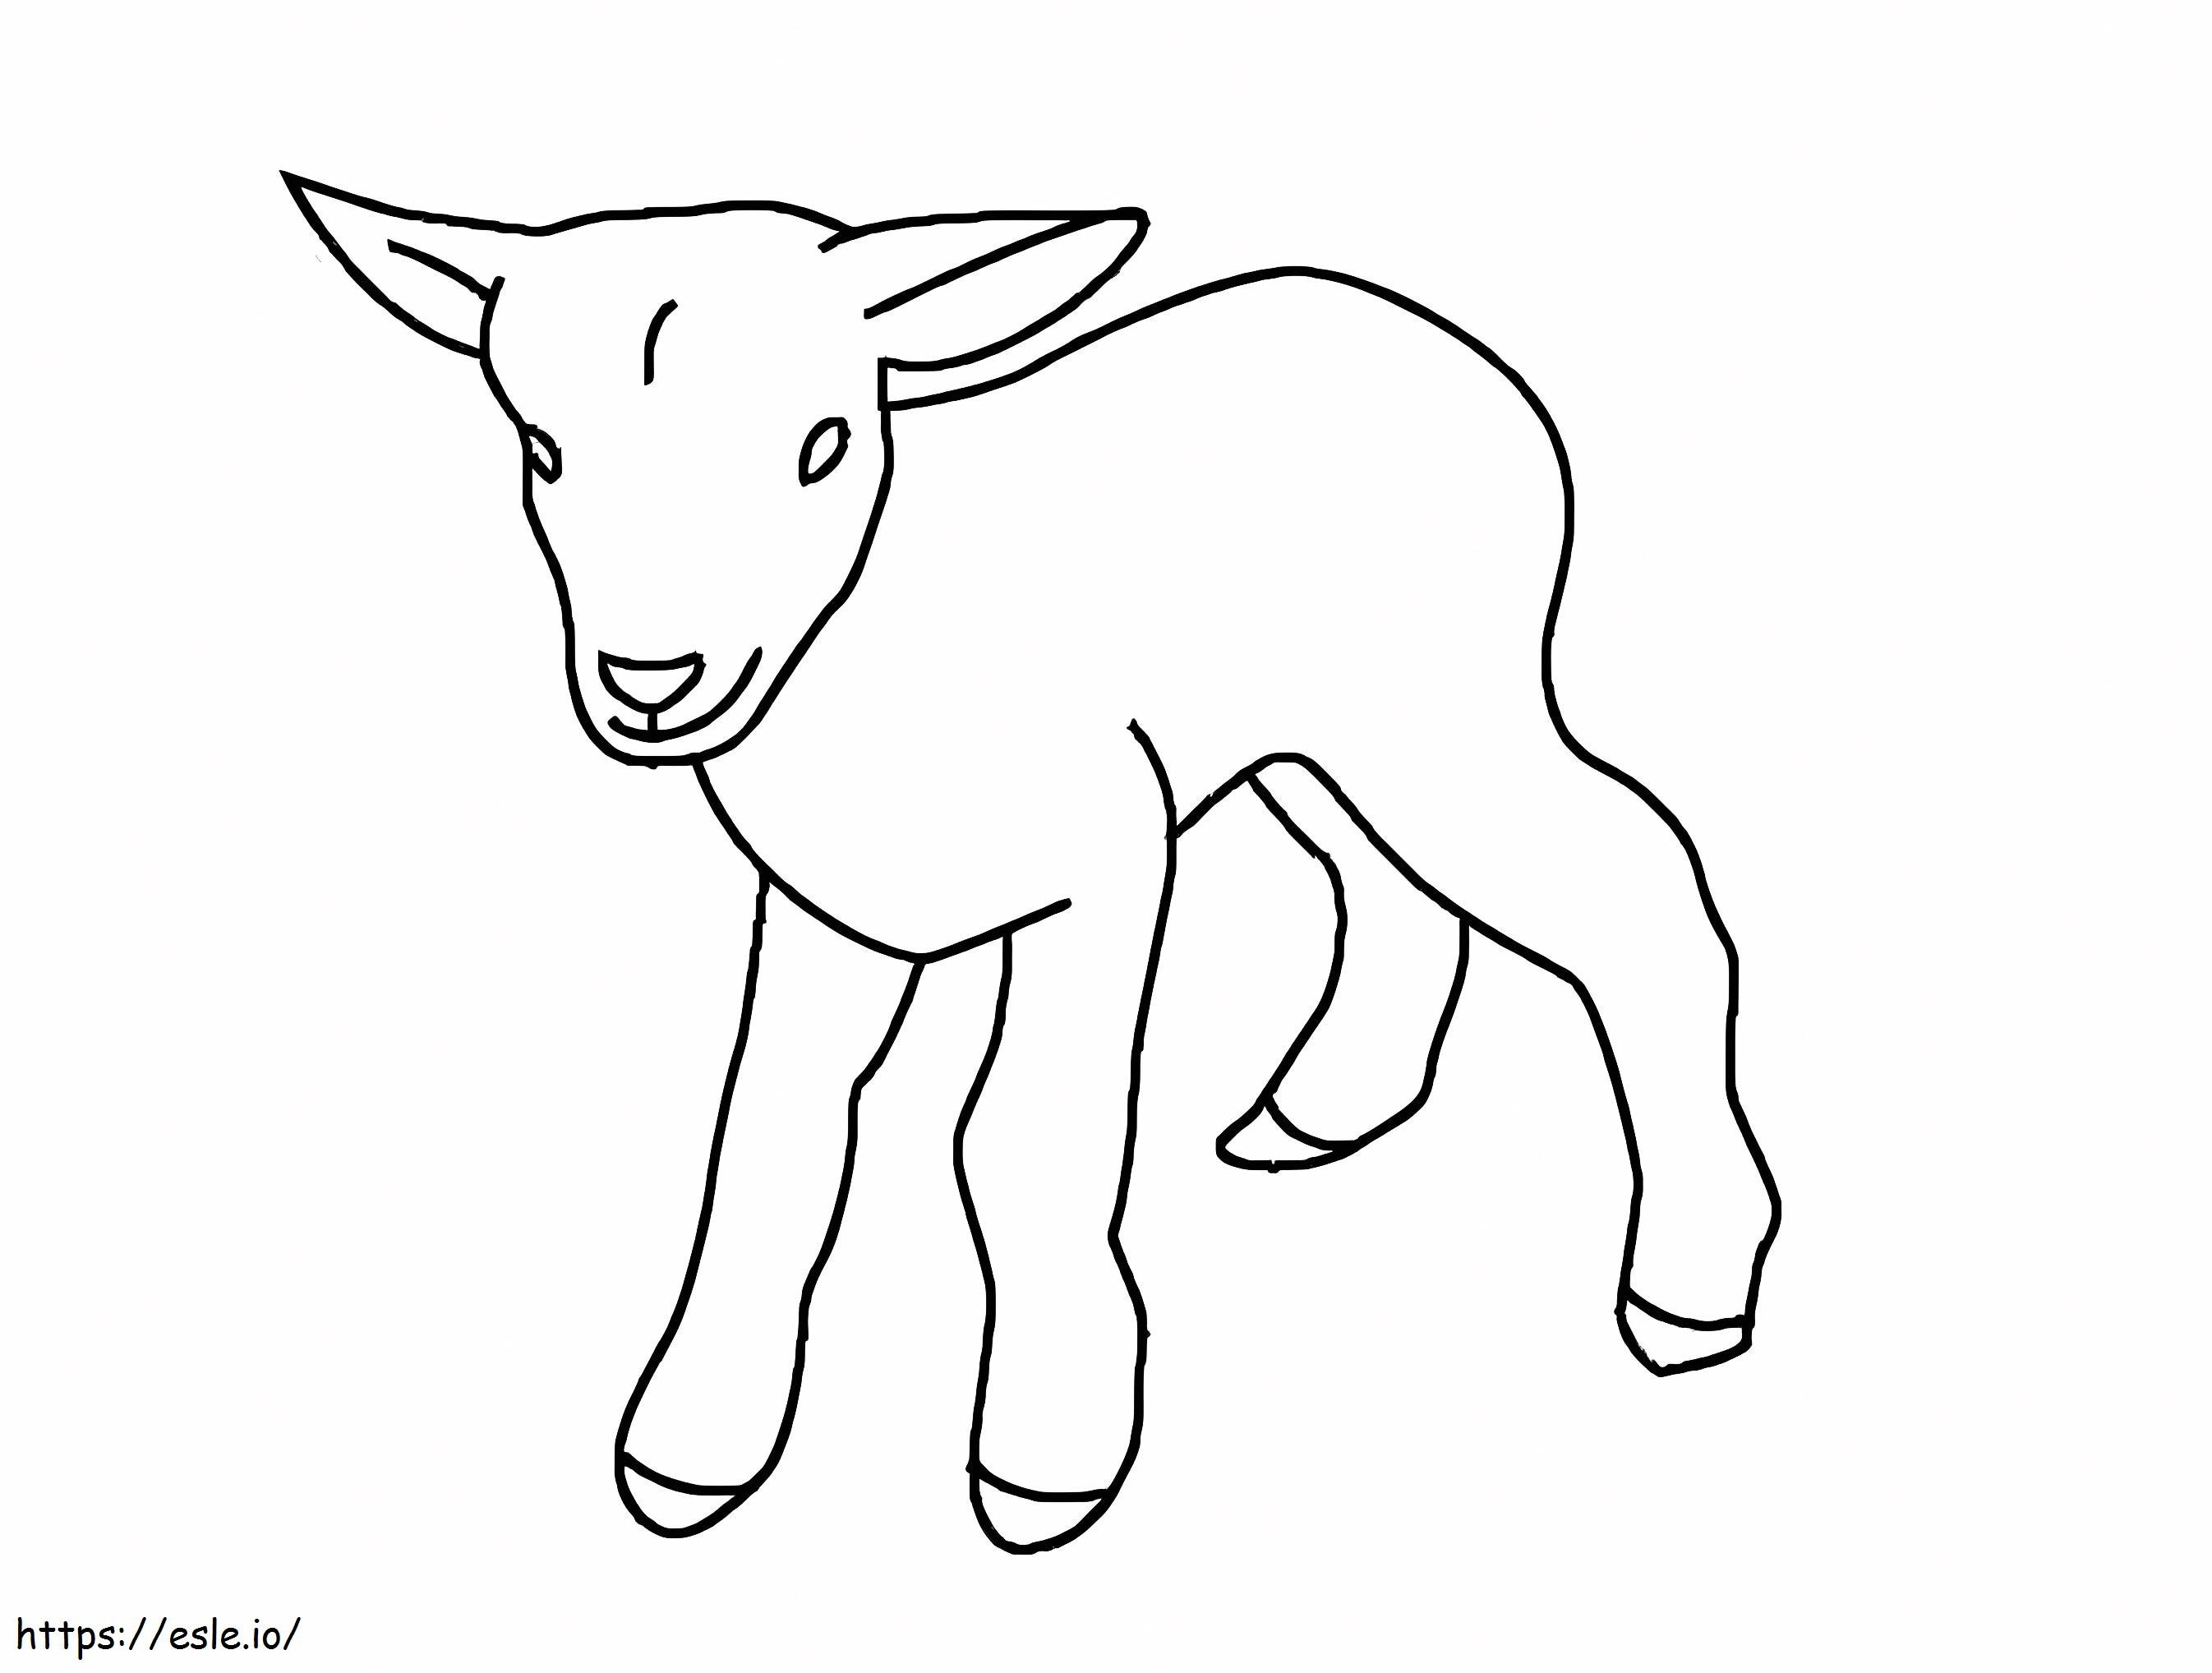 Baby Goat coloring page